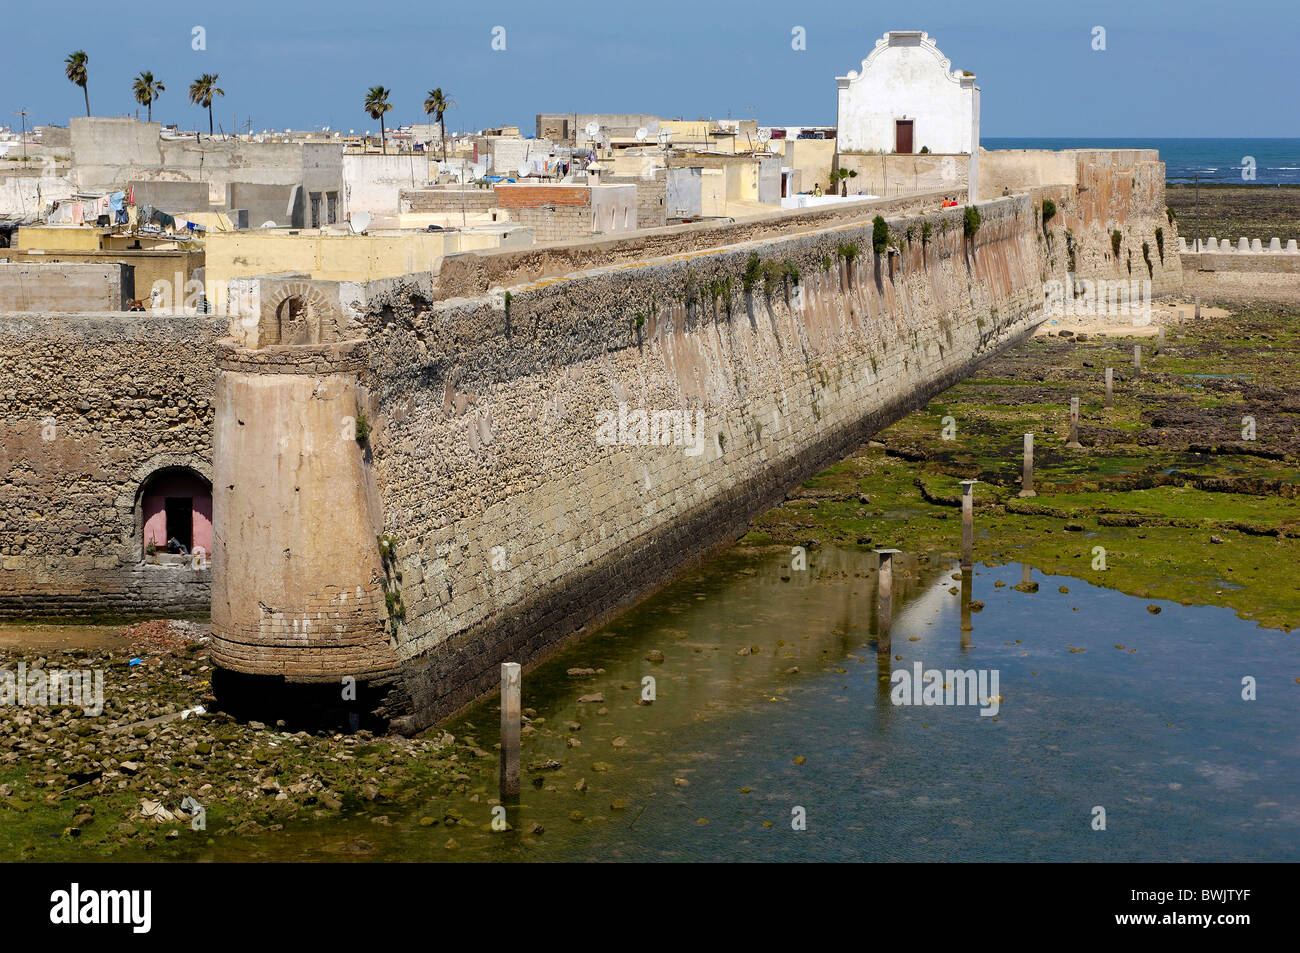 fortress town wall Cite Portugaise Old Town coast sea El Jadida Morocco Africa North Africa Stock Photo